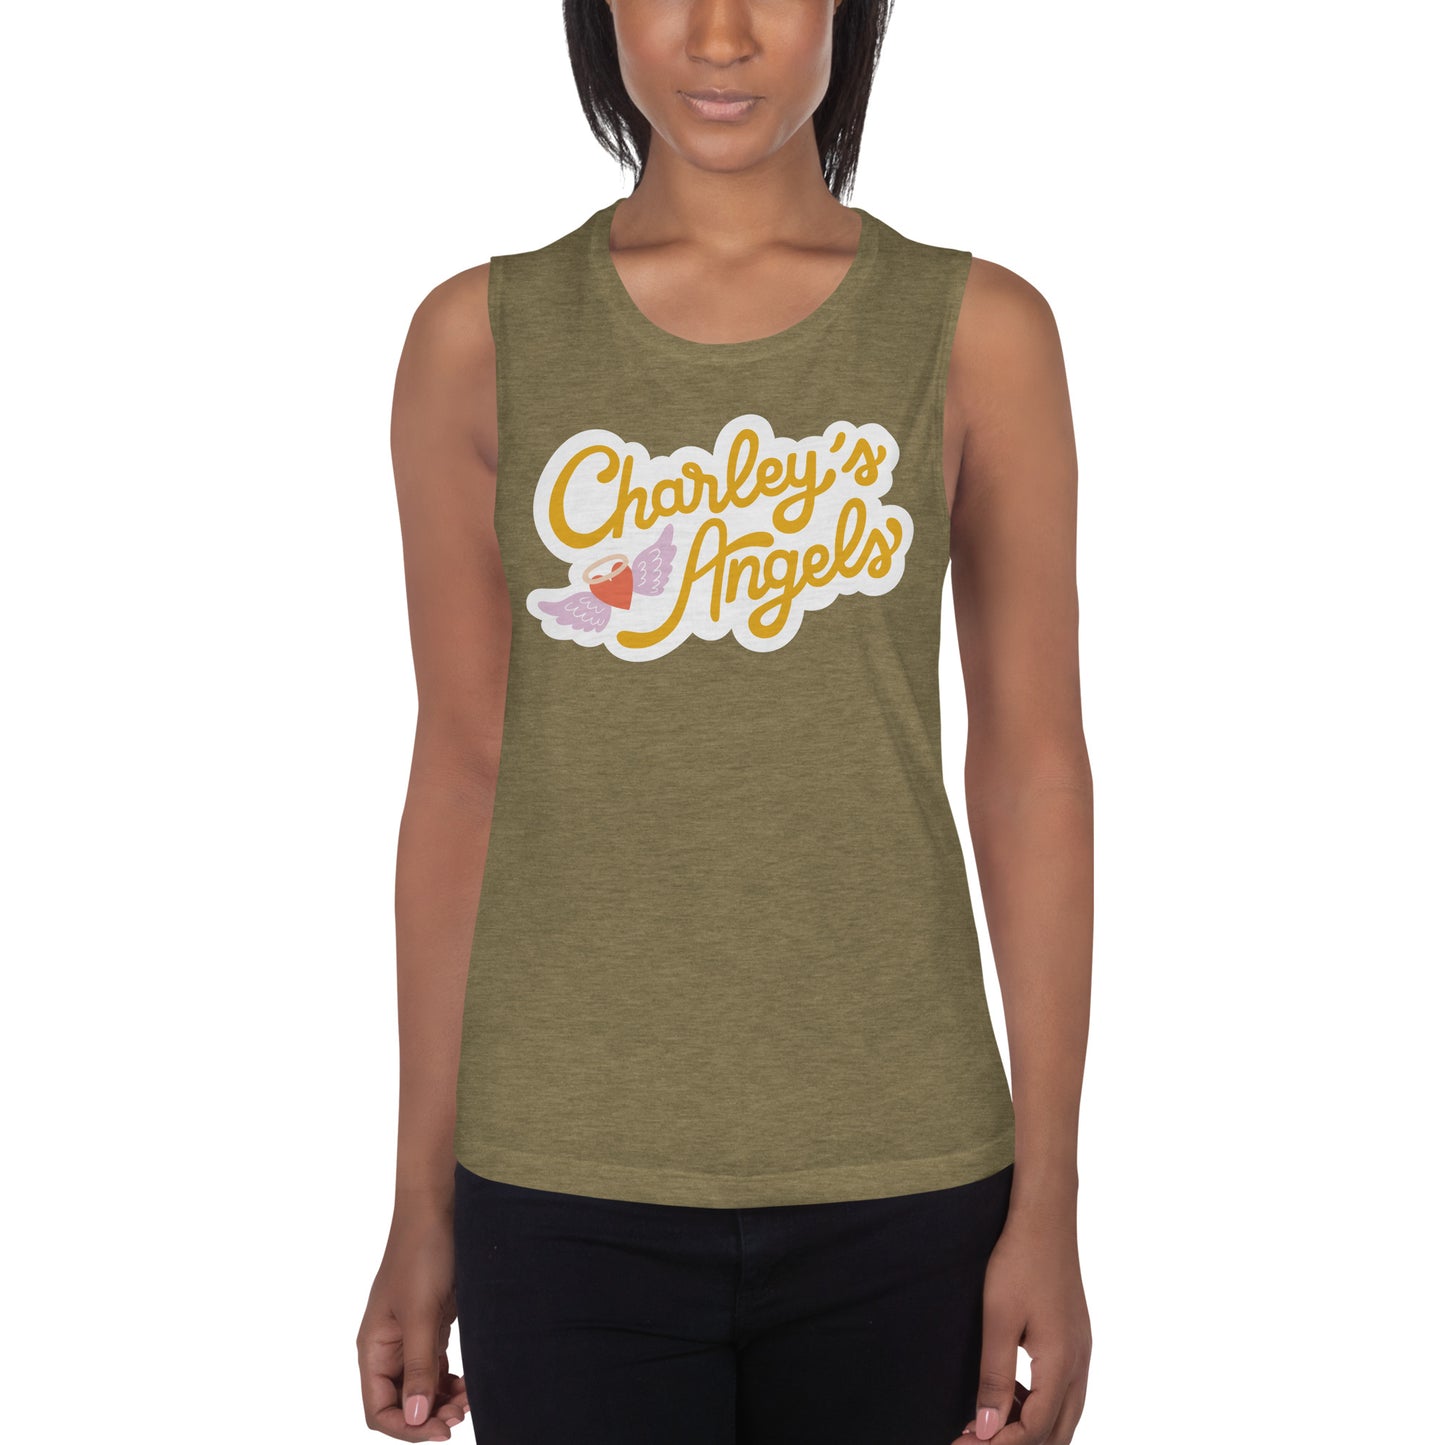 Charley's Angels — Muscle Tank